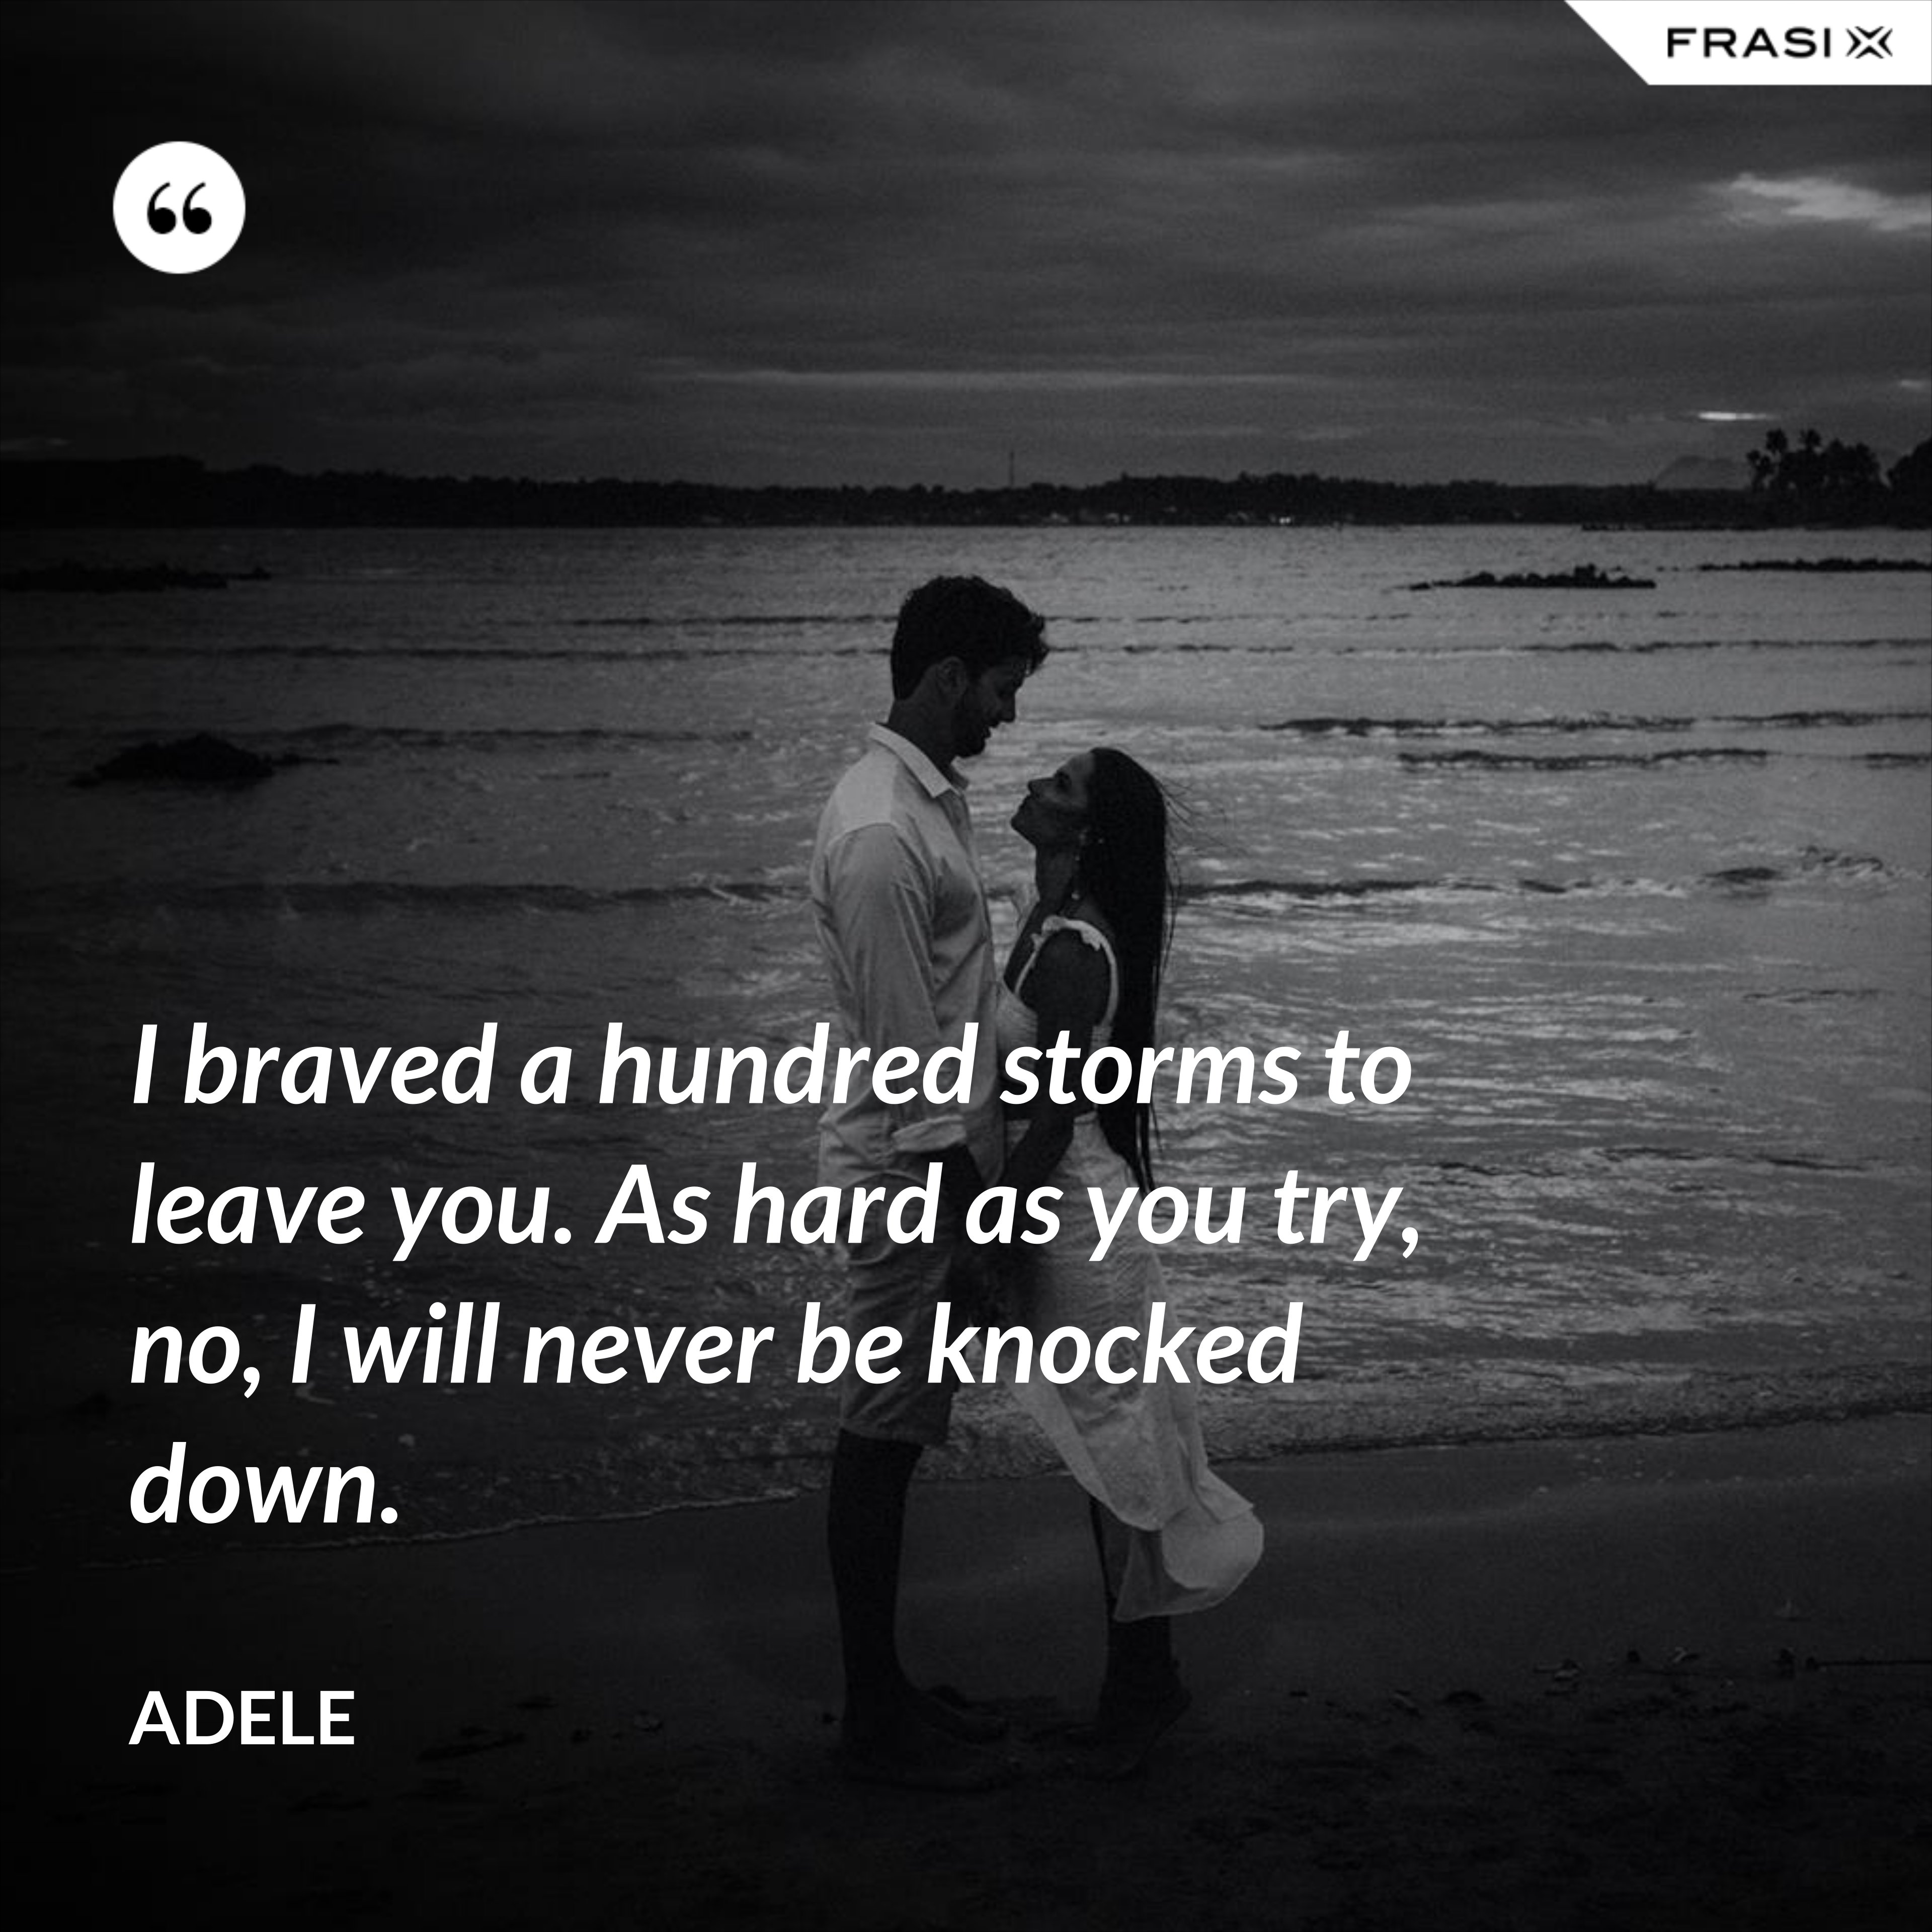 I braved a hundred storms to leave you. As hard as you try, no, I will never be knocked down. - Adele